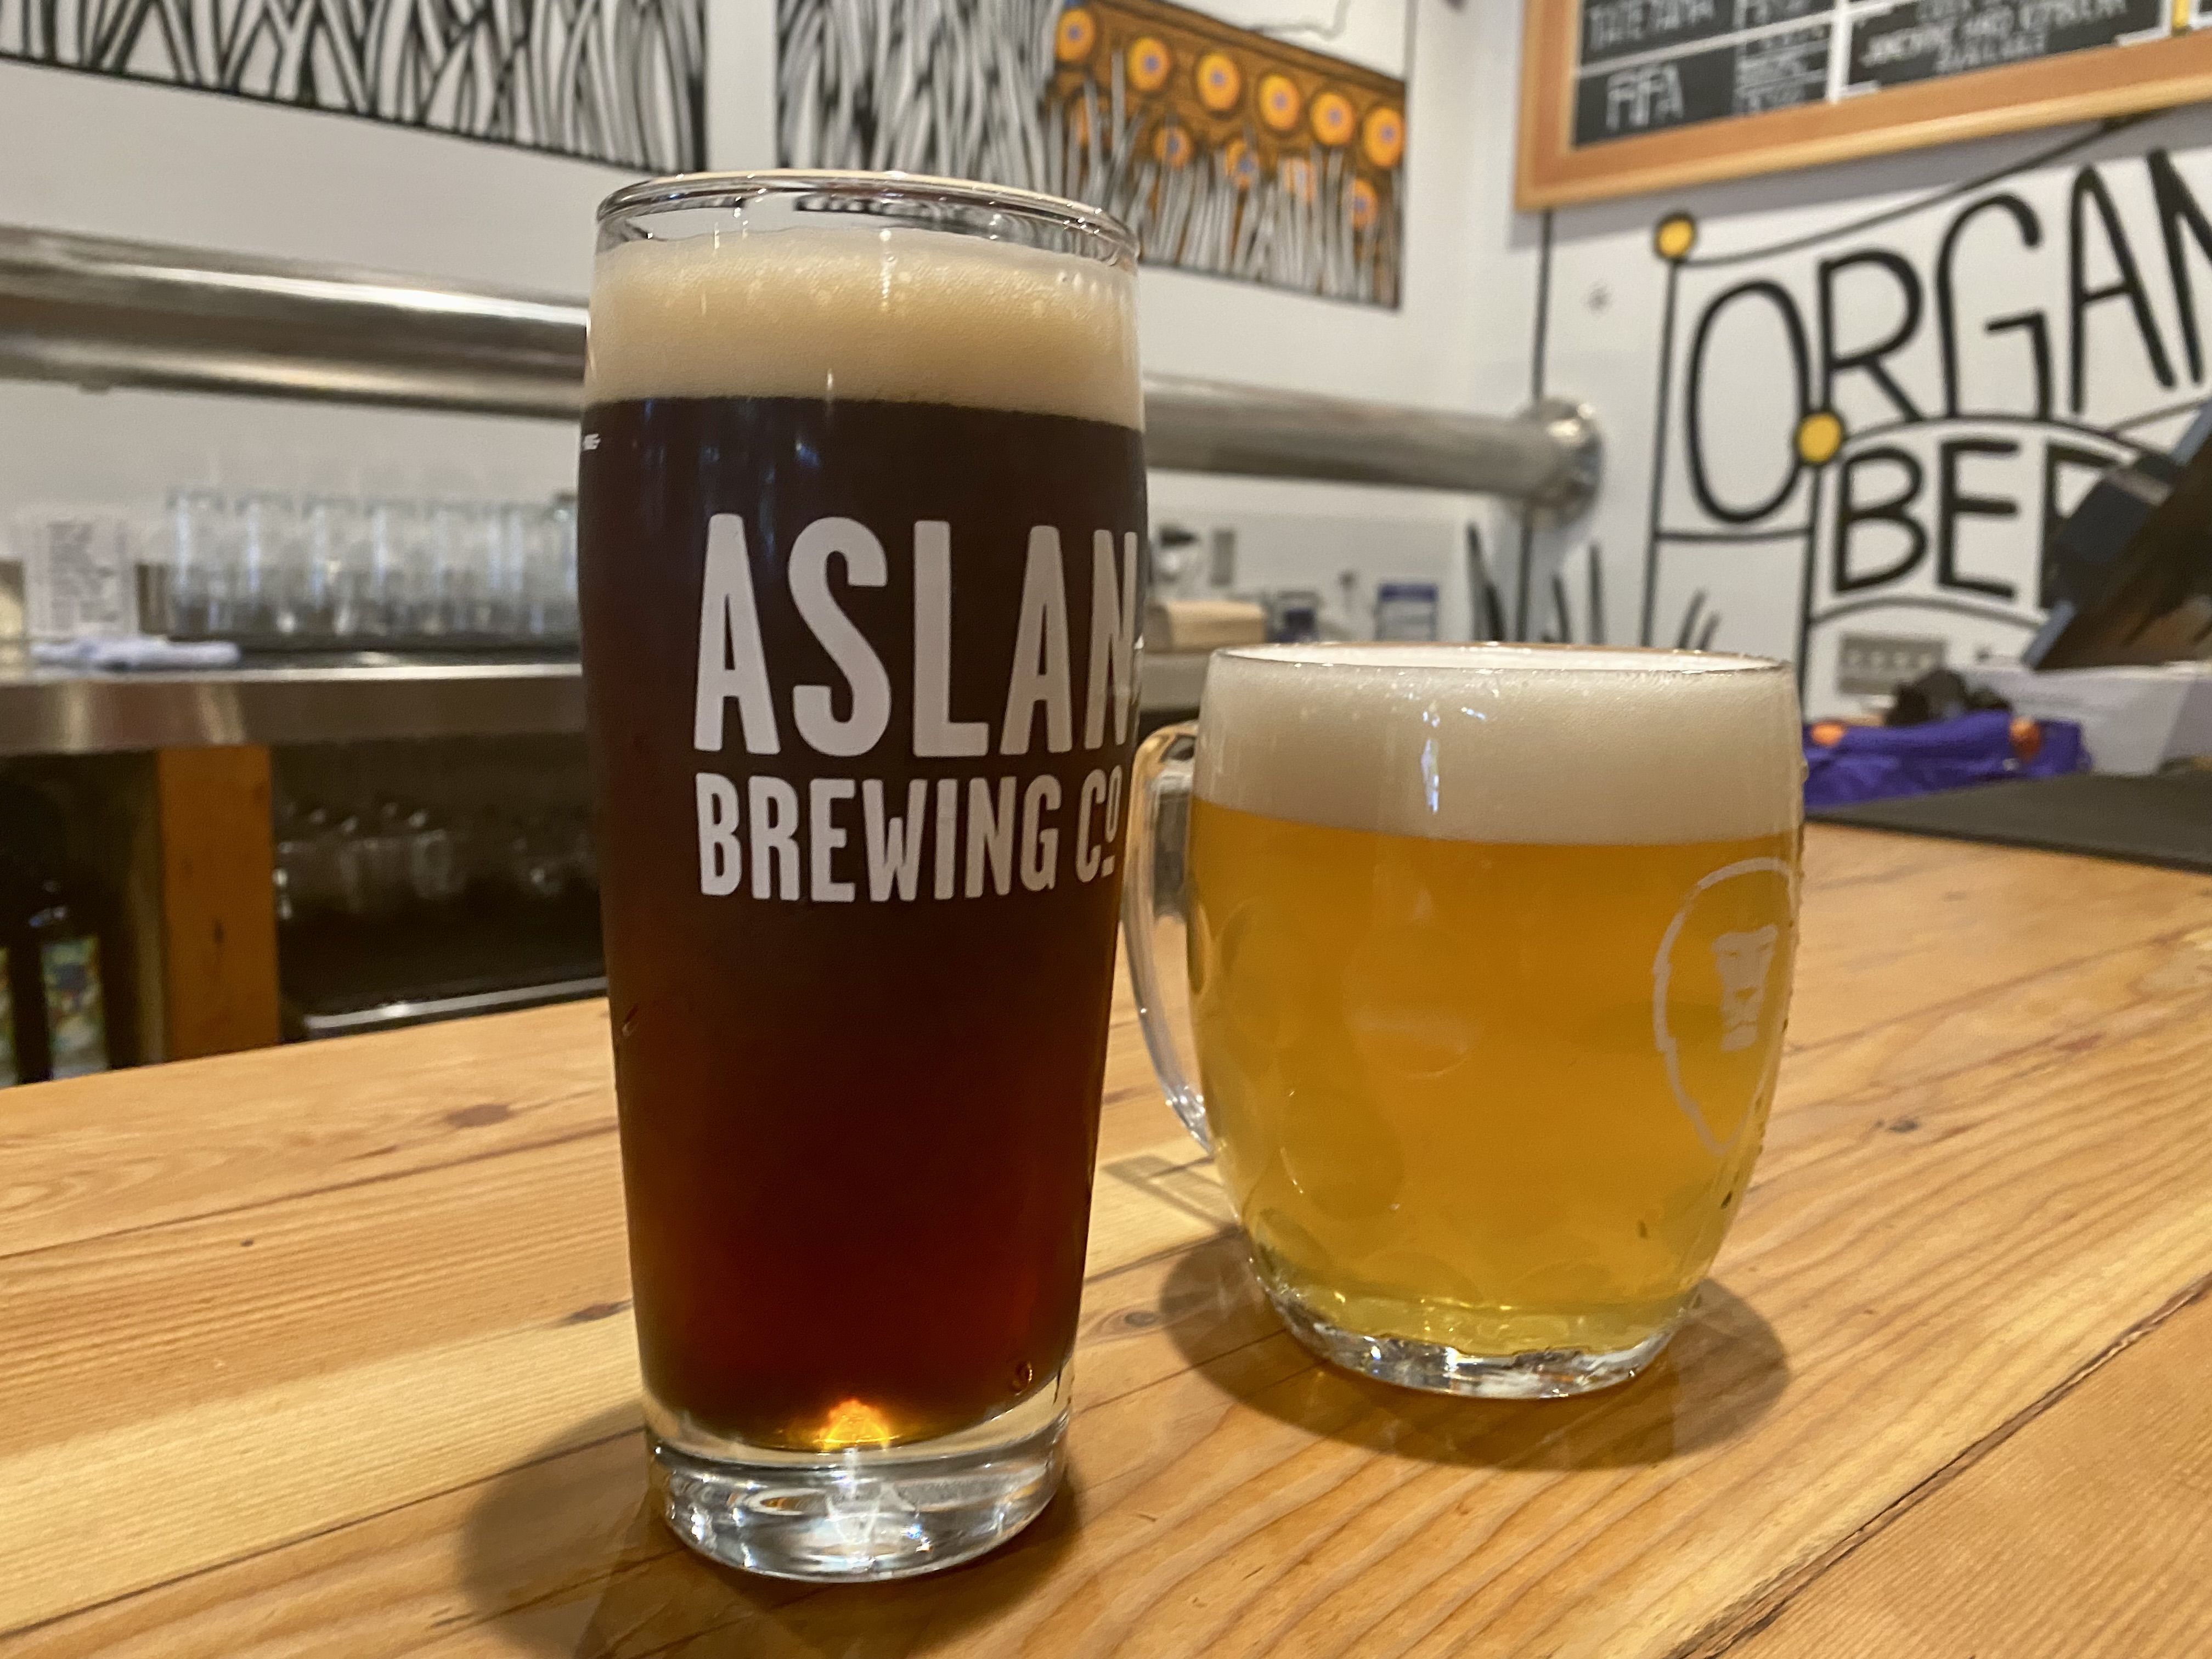 A brown beer in a tall glass and a lighter colored beer in a shorter glass, both labeled "Aslan Brewing," sitting on a wooden bar.